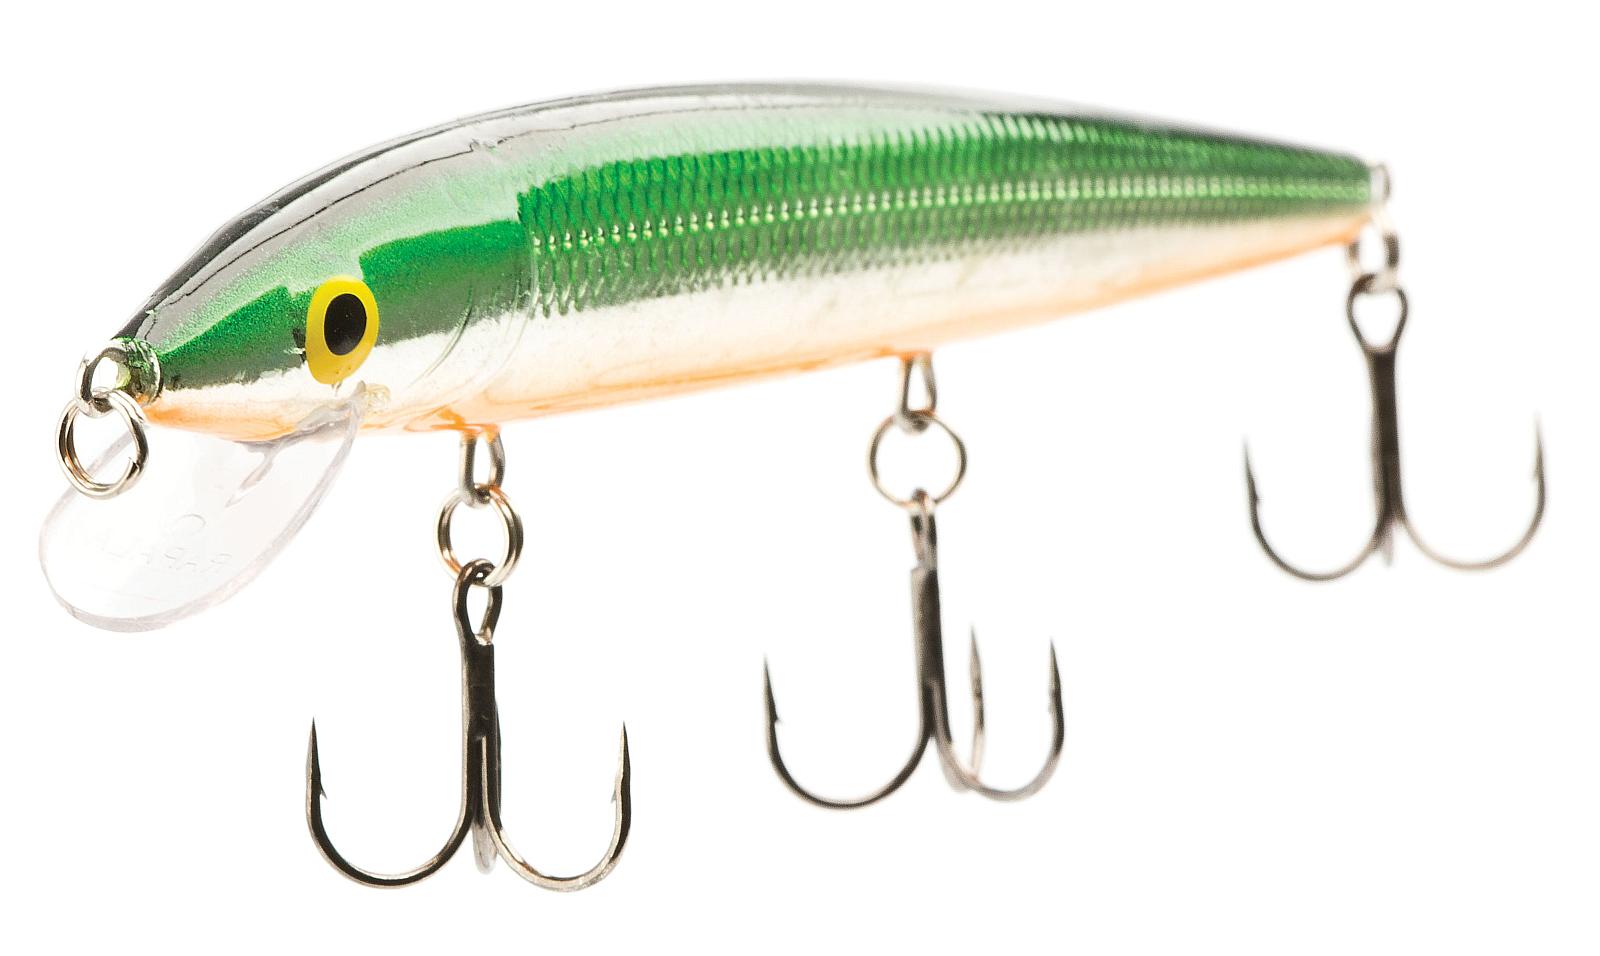 How to Weight a Lure - With Suspendots 